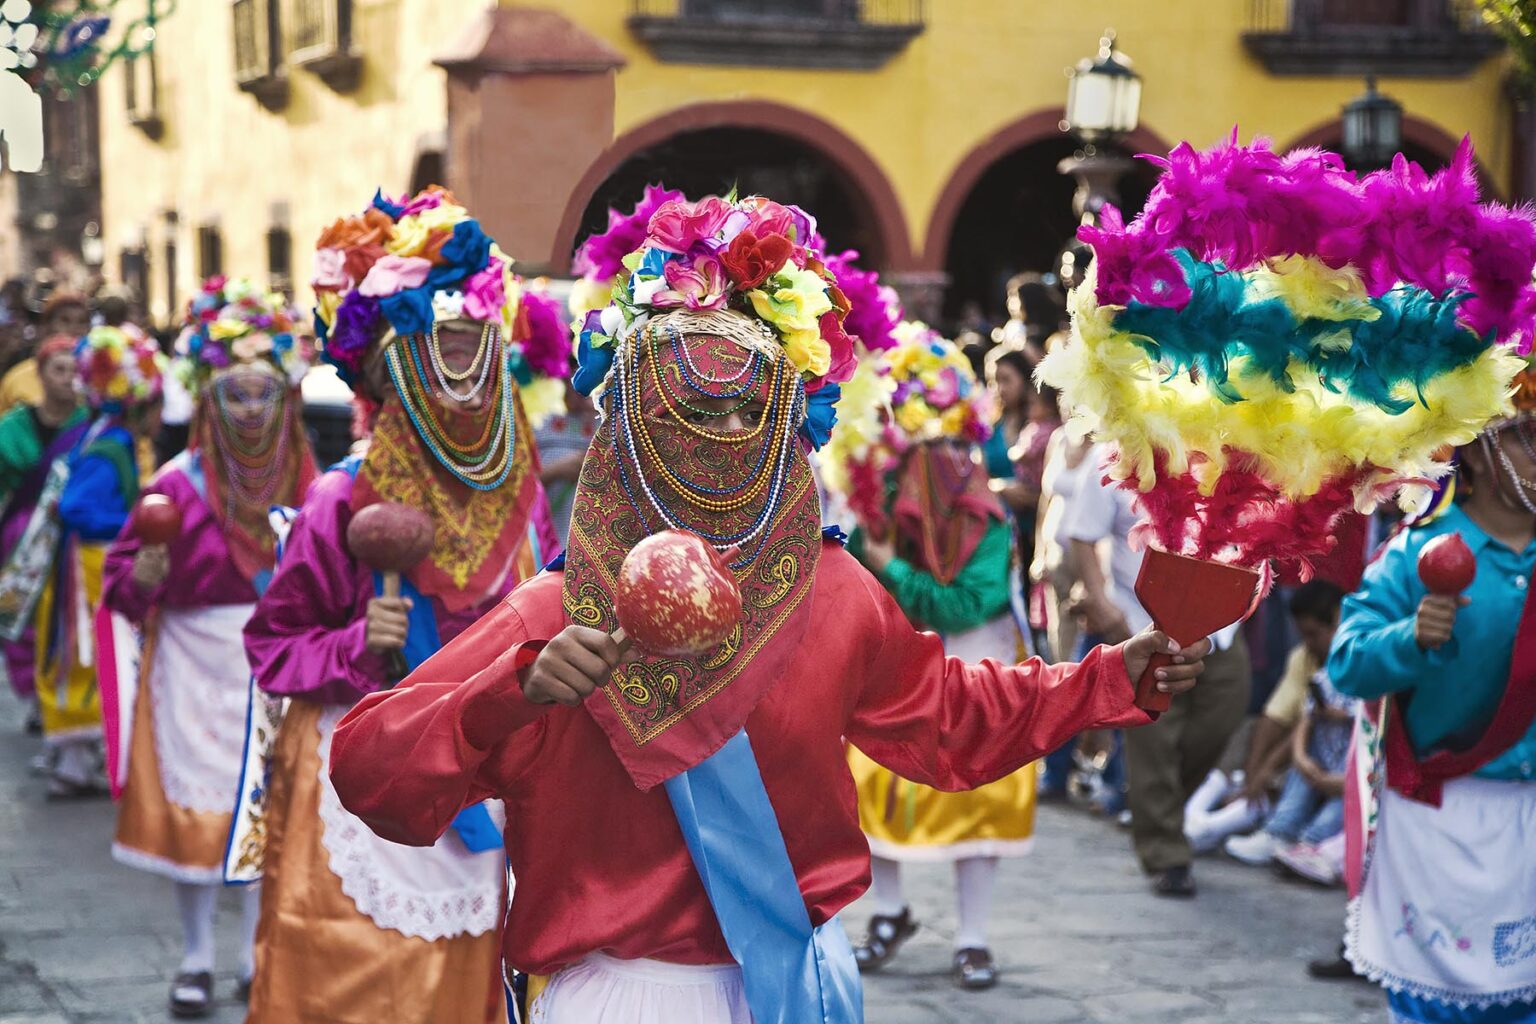 Dance troupes come from all parts of Mexico representing their tribe in the annual INDEPENDENCE DAY PARADE in September - SAN MIGUEL DE ALLENDE, MEXICO